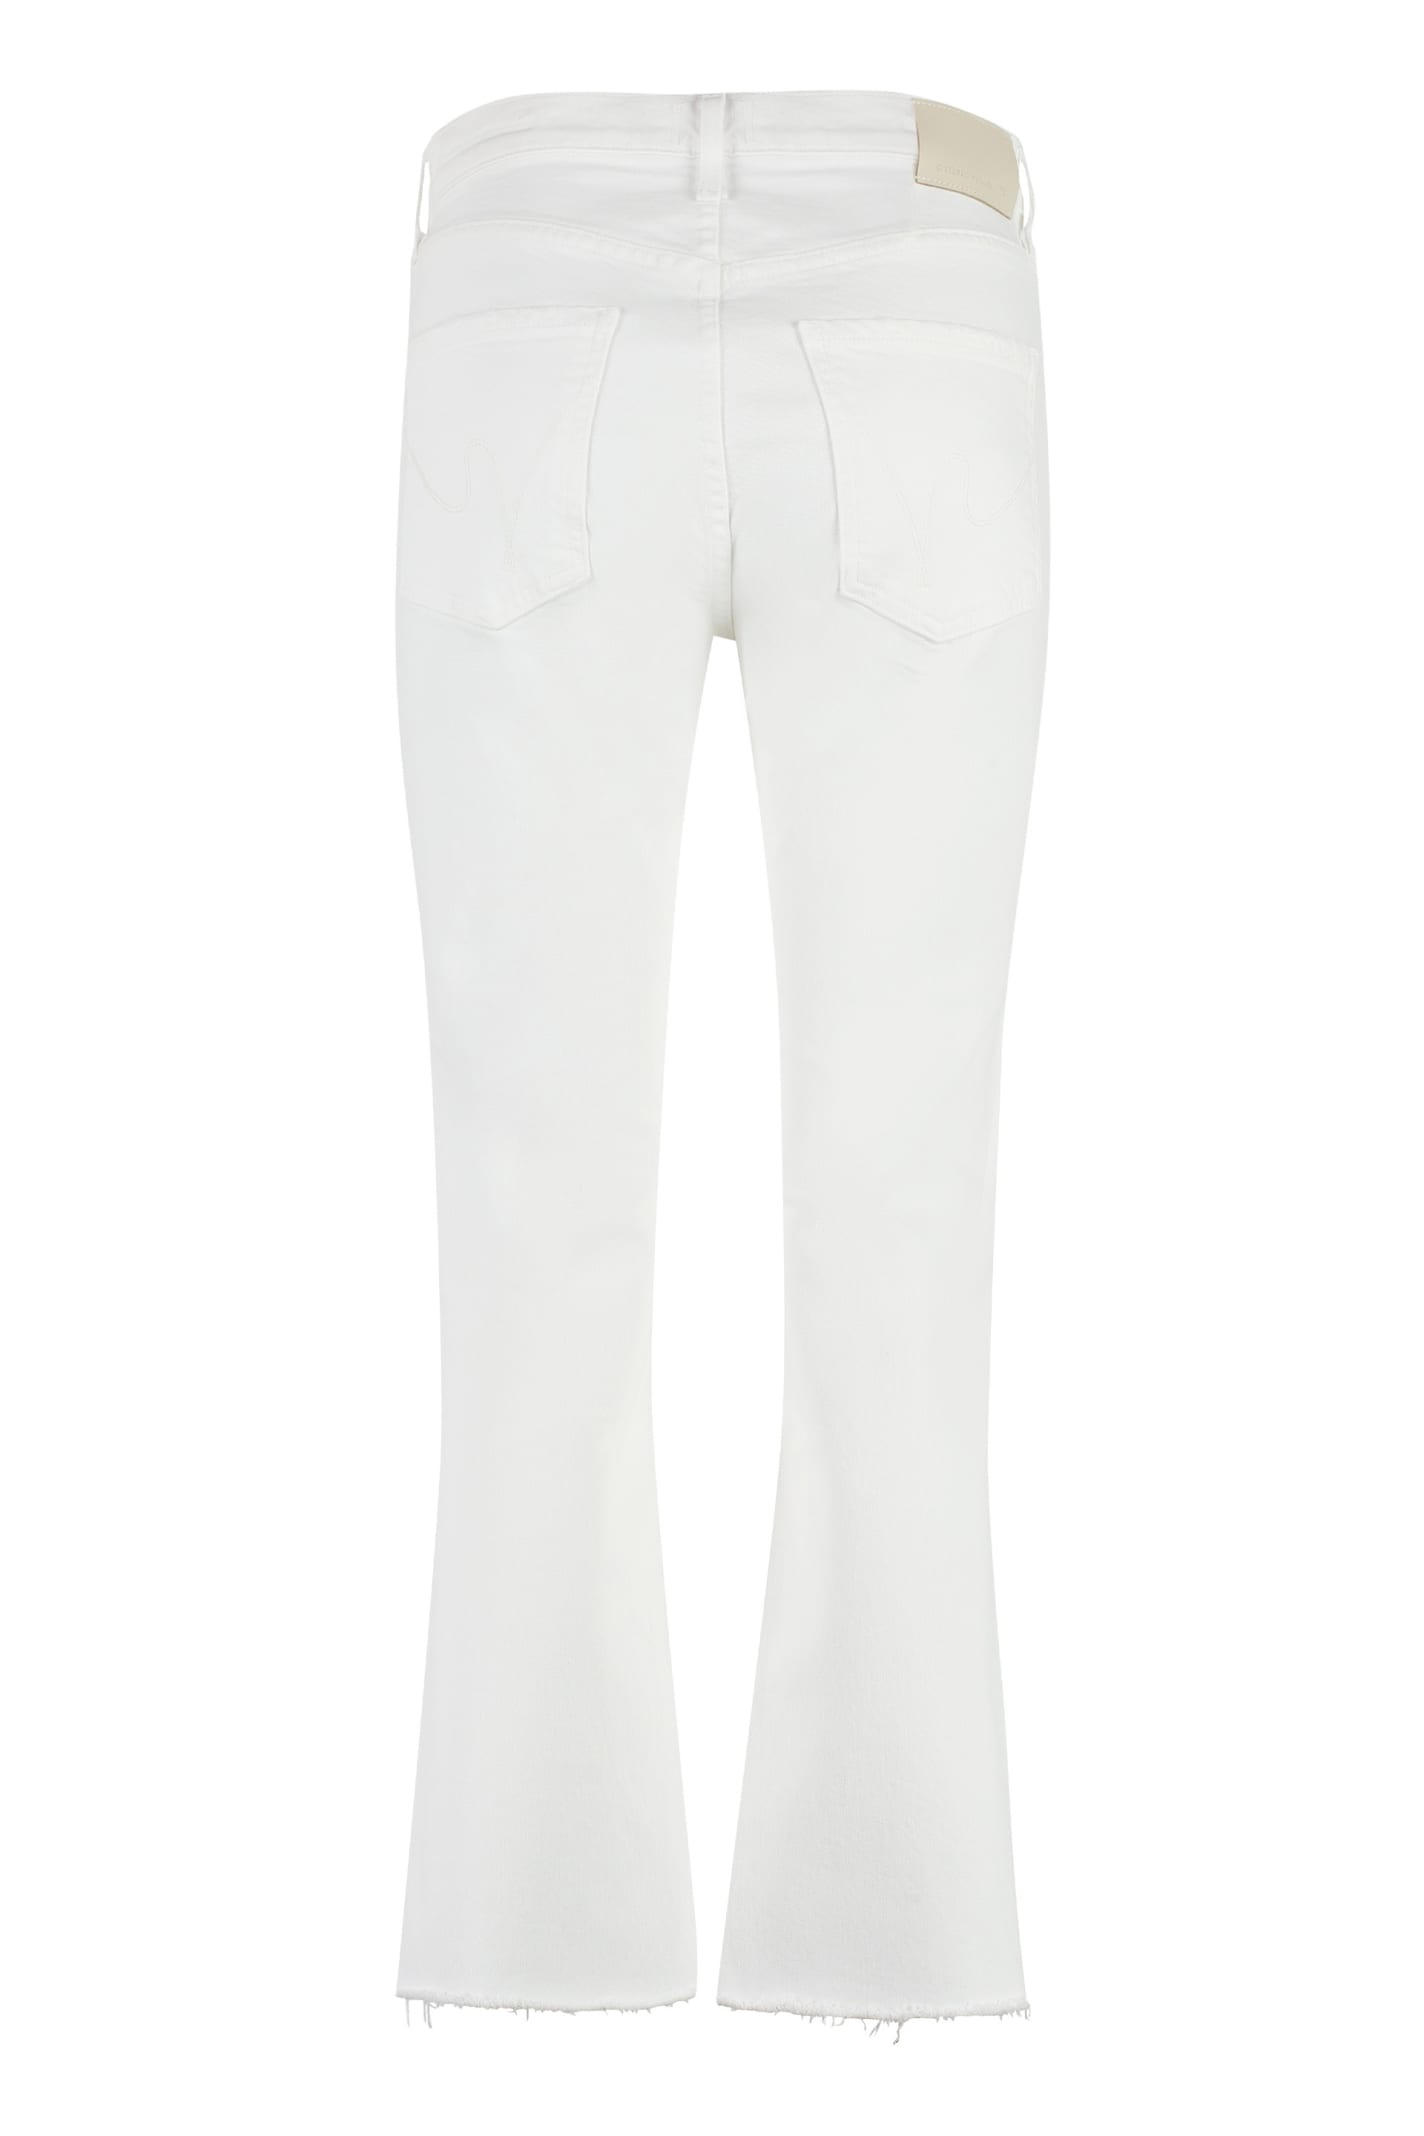 Shop Citizens Of Humanity Isola Jeans In Mayfair White